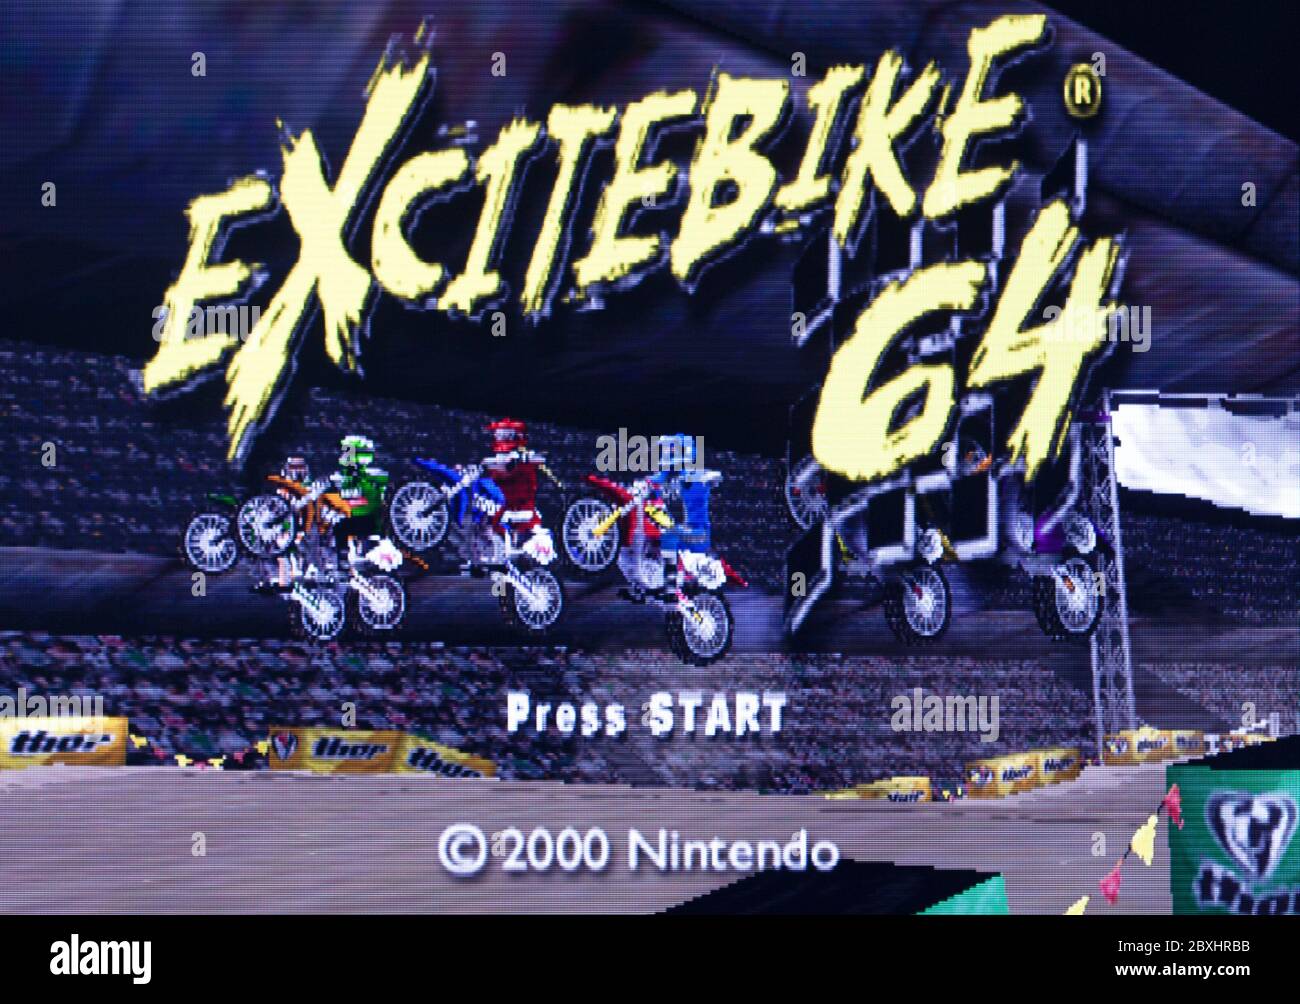 Excitebike 64 - Nintendo 64 Videogame - Editorial use only Stock Photo -  Alamy